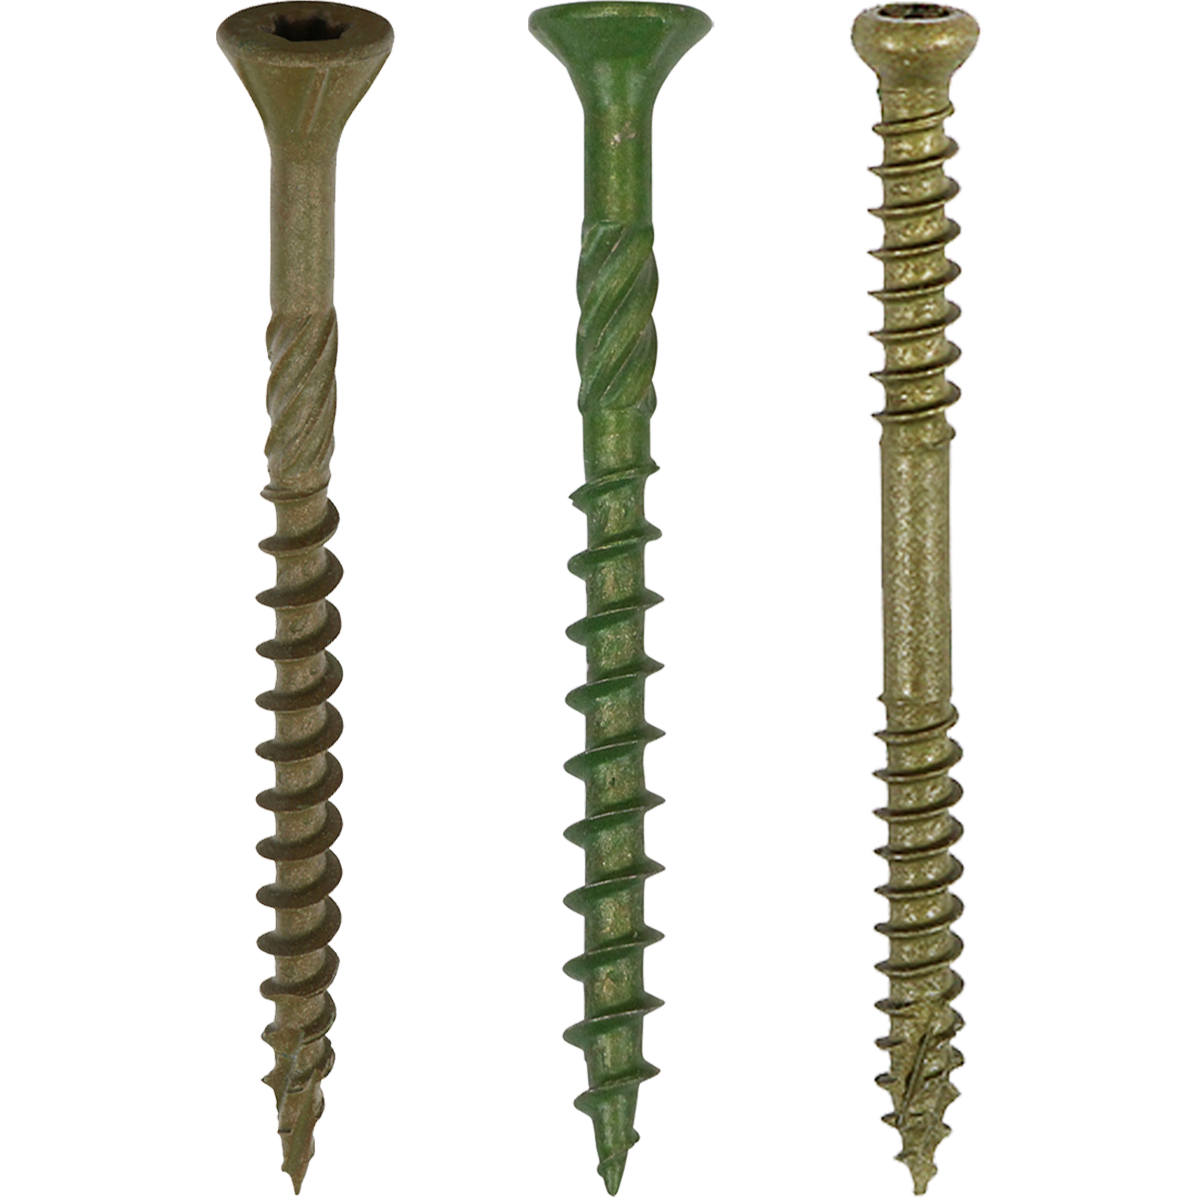 Decking screws with a deep thread and organic green passivation, which has been saltwater tested, making them ideal for external use.